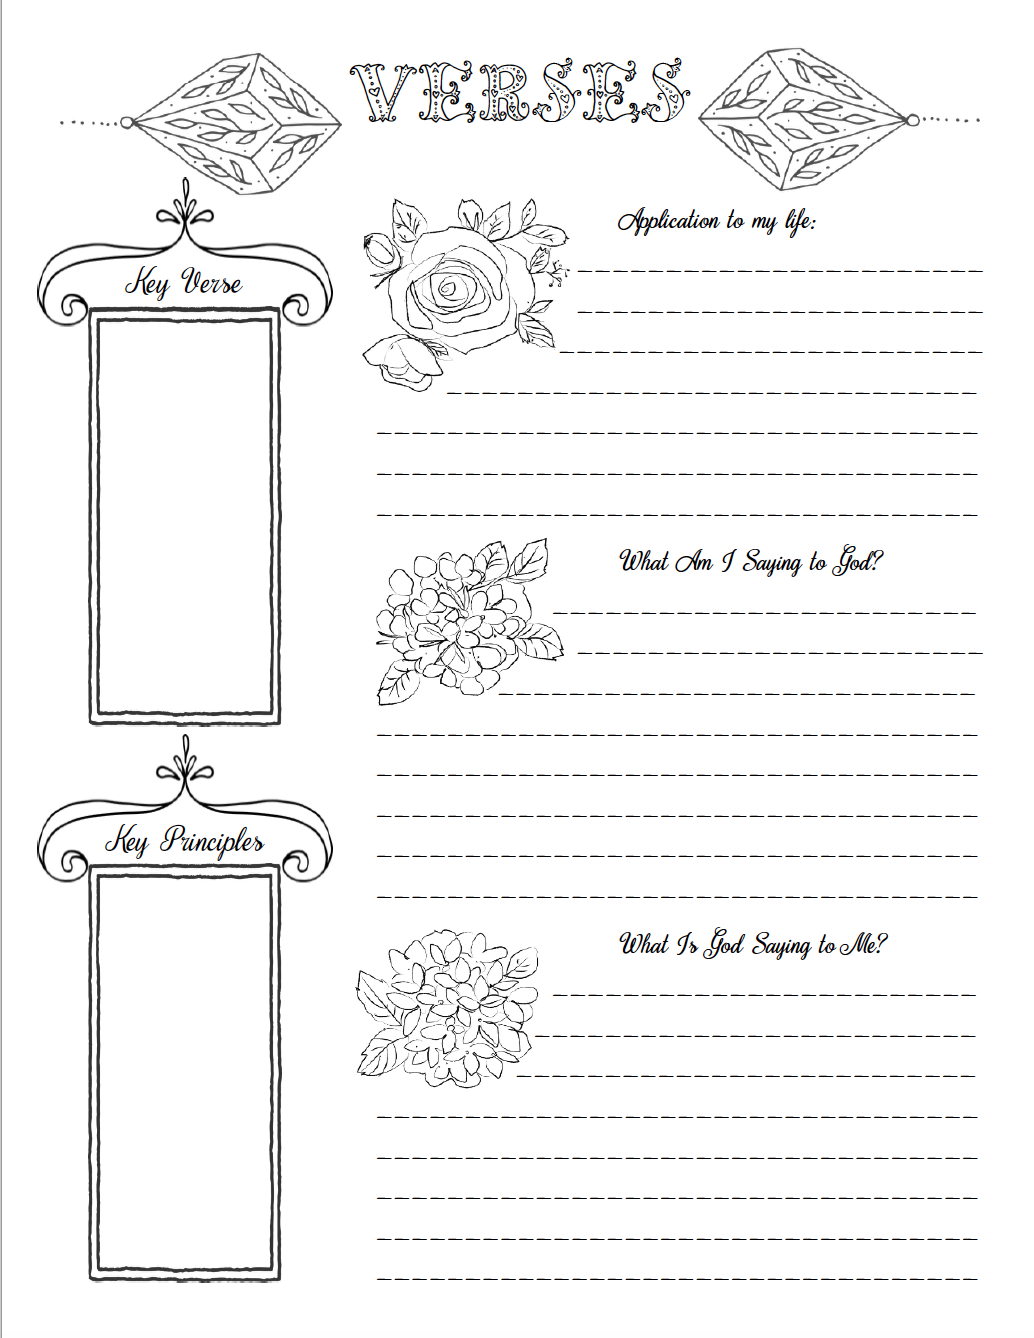 free-bible-journaling-printables-including-one-you-can-color